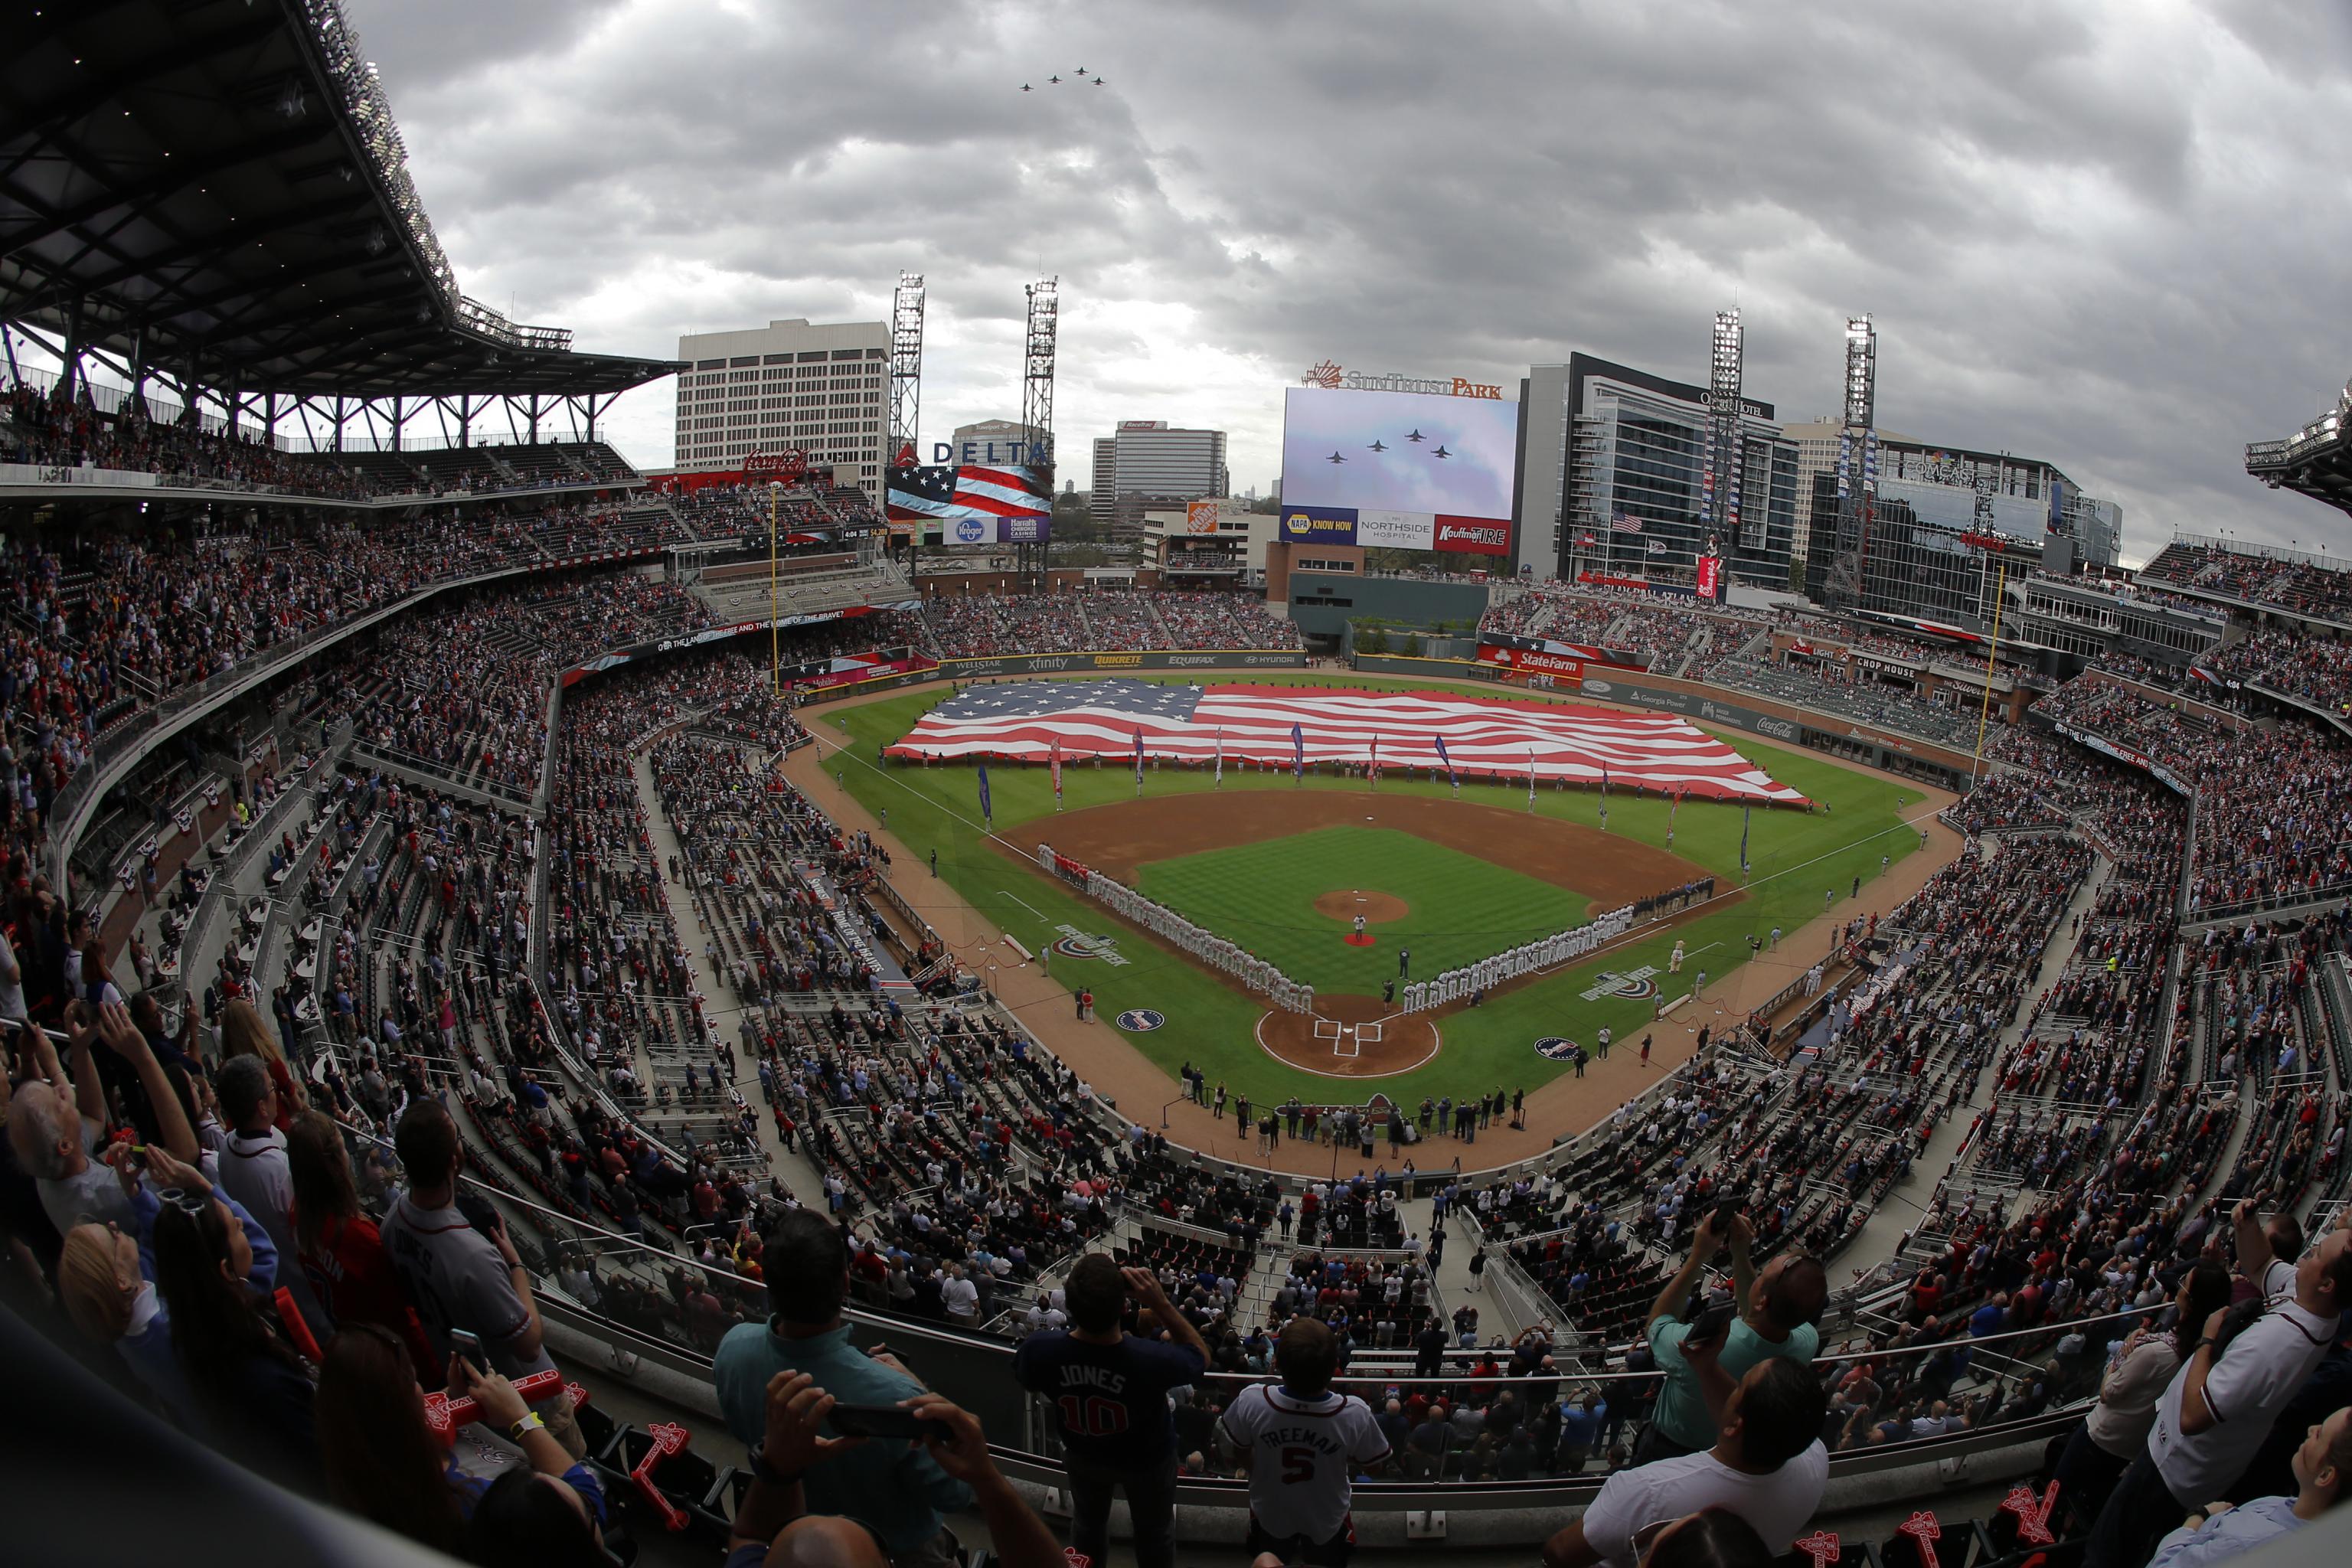 The Braves Play Taxpayers Better Than They Play Baseball